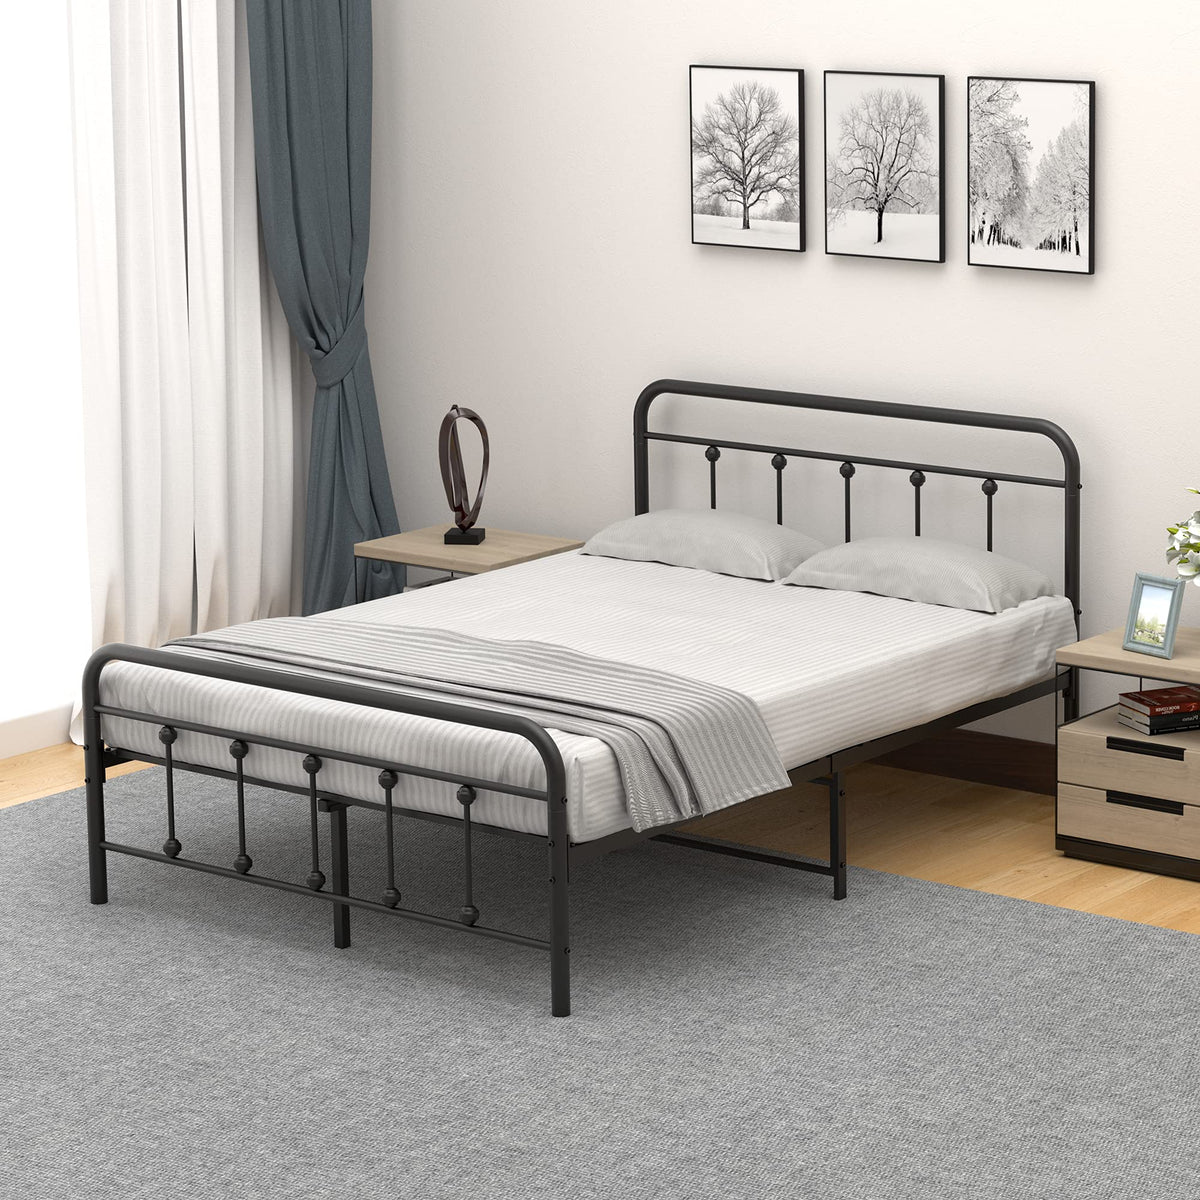 IDEALHOUSE Full Size Metal Bed Frame with Victorian Headboard